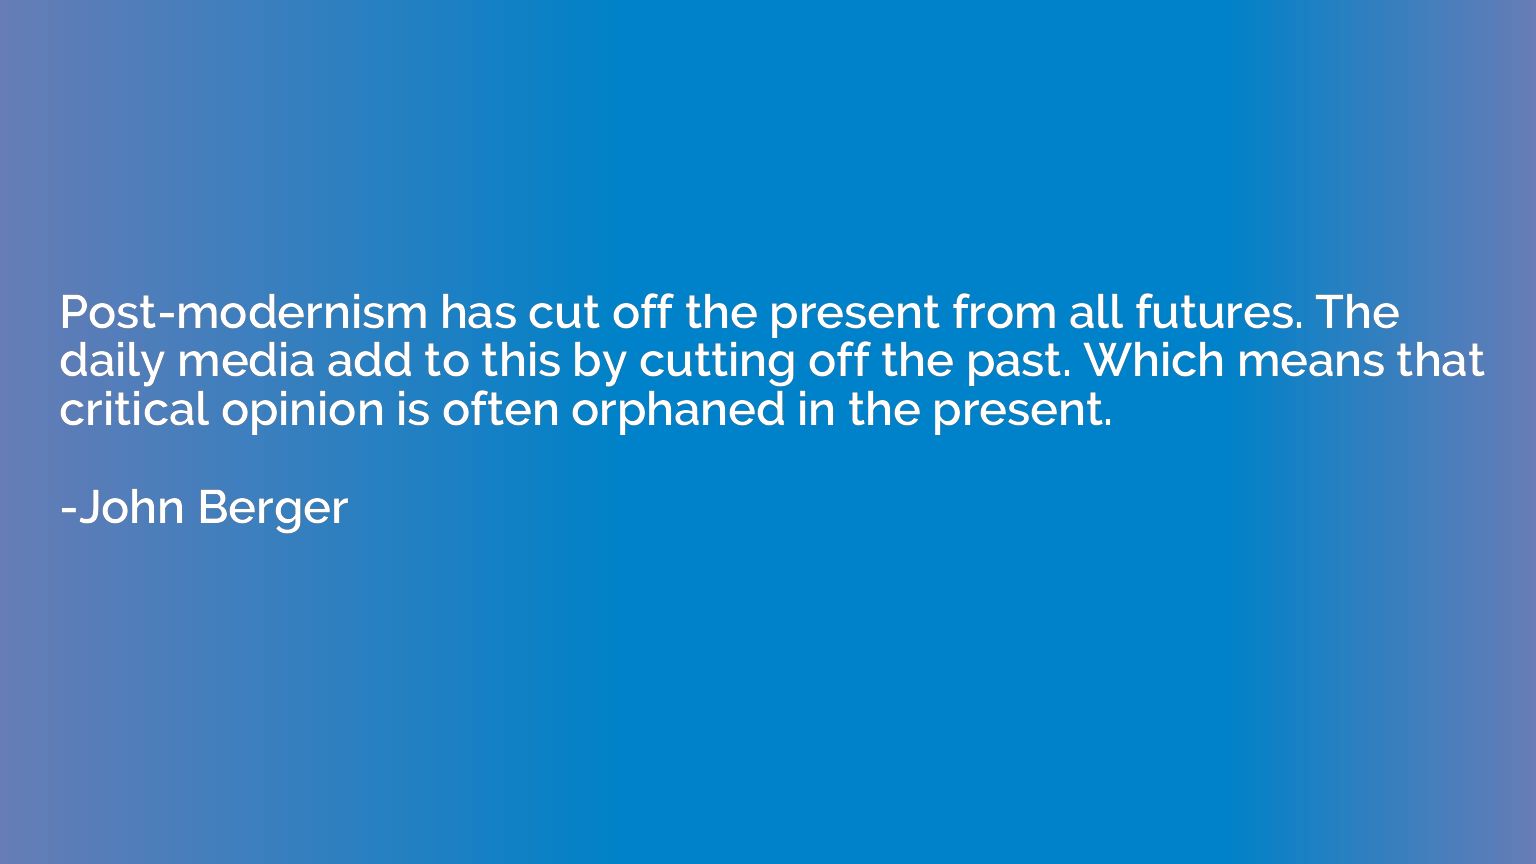 Post-modernism has cut off the present from all futures. The